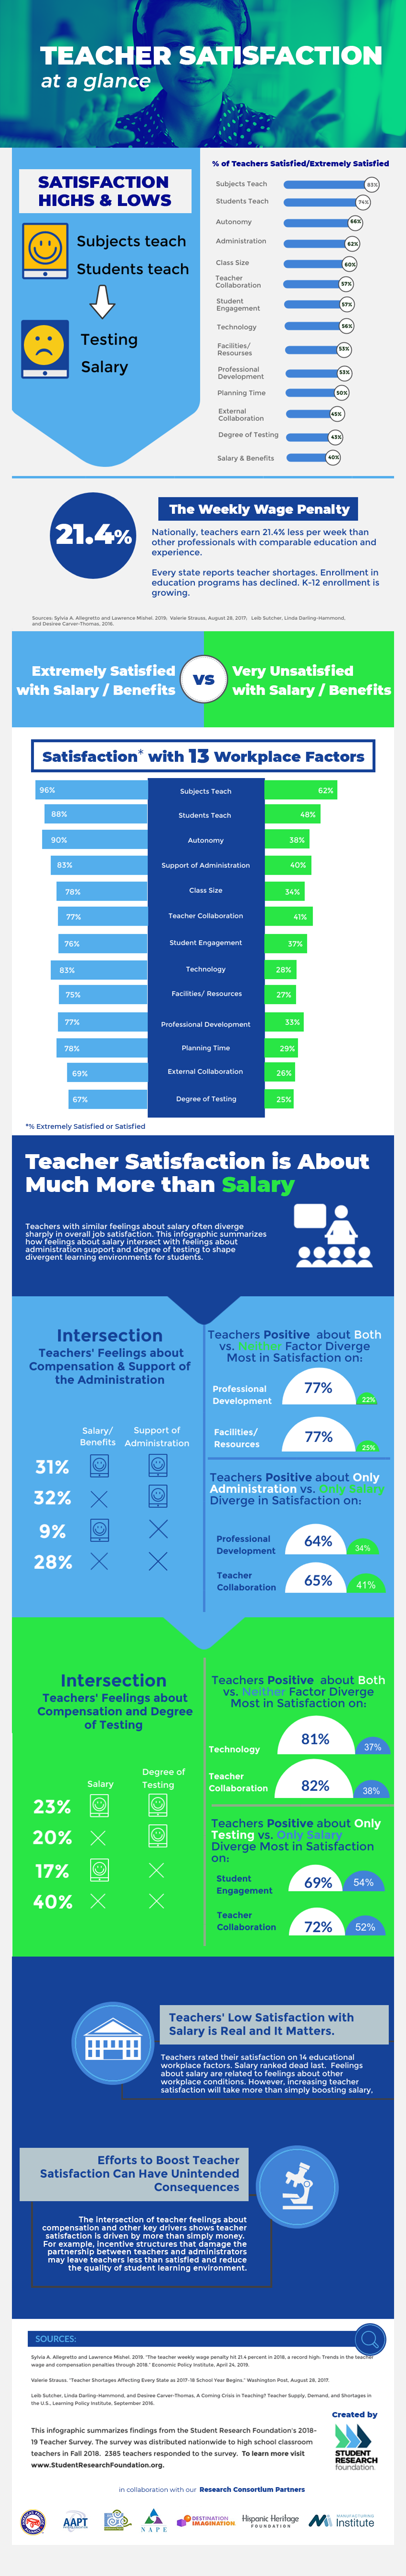 Teacher Satisfaction Research - Student Research Foundation 